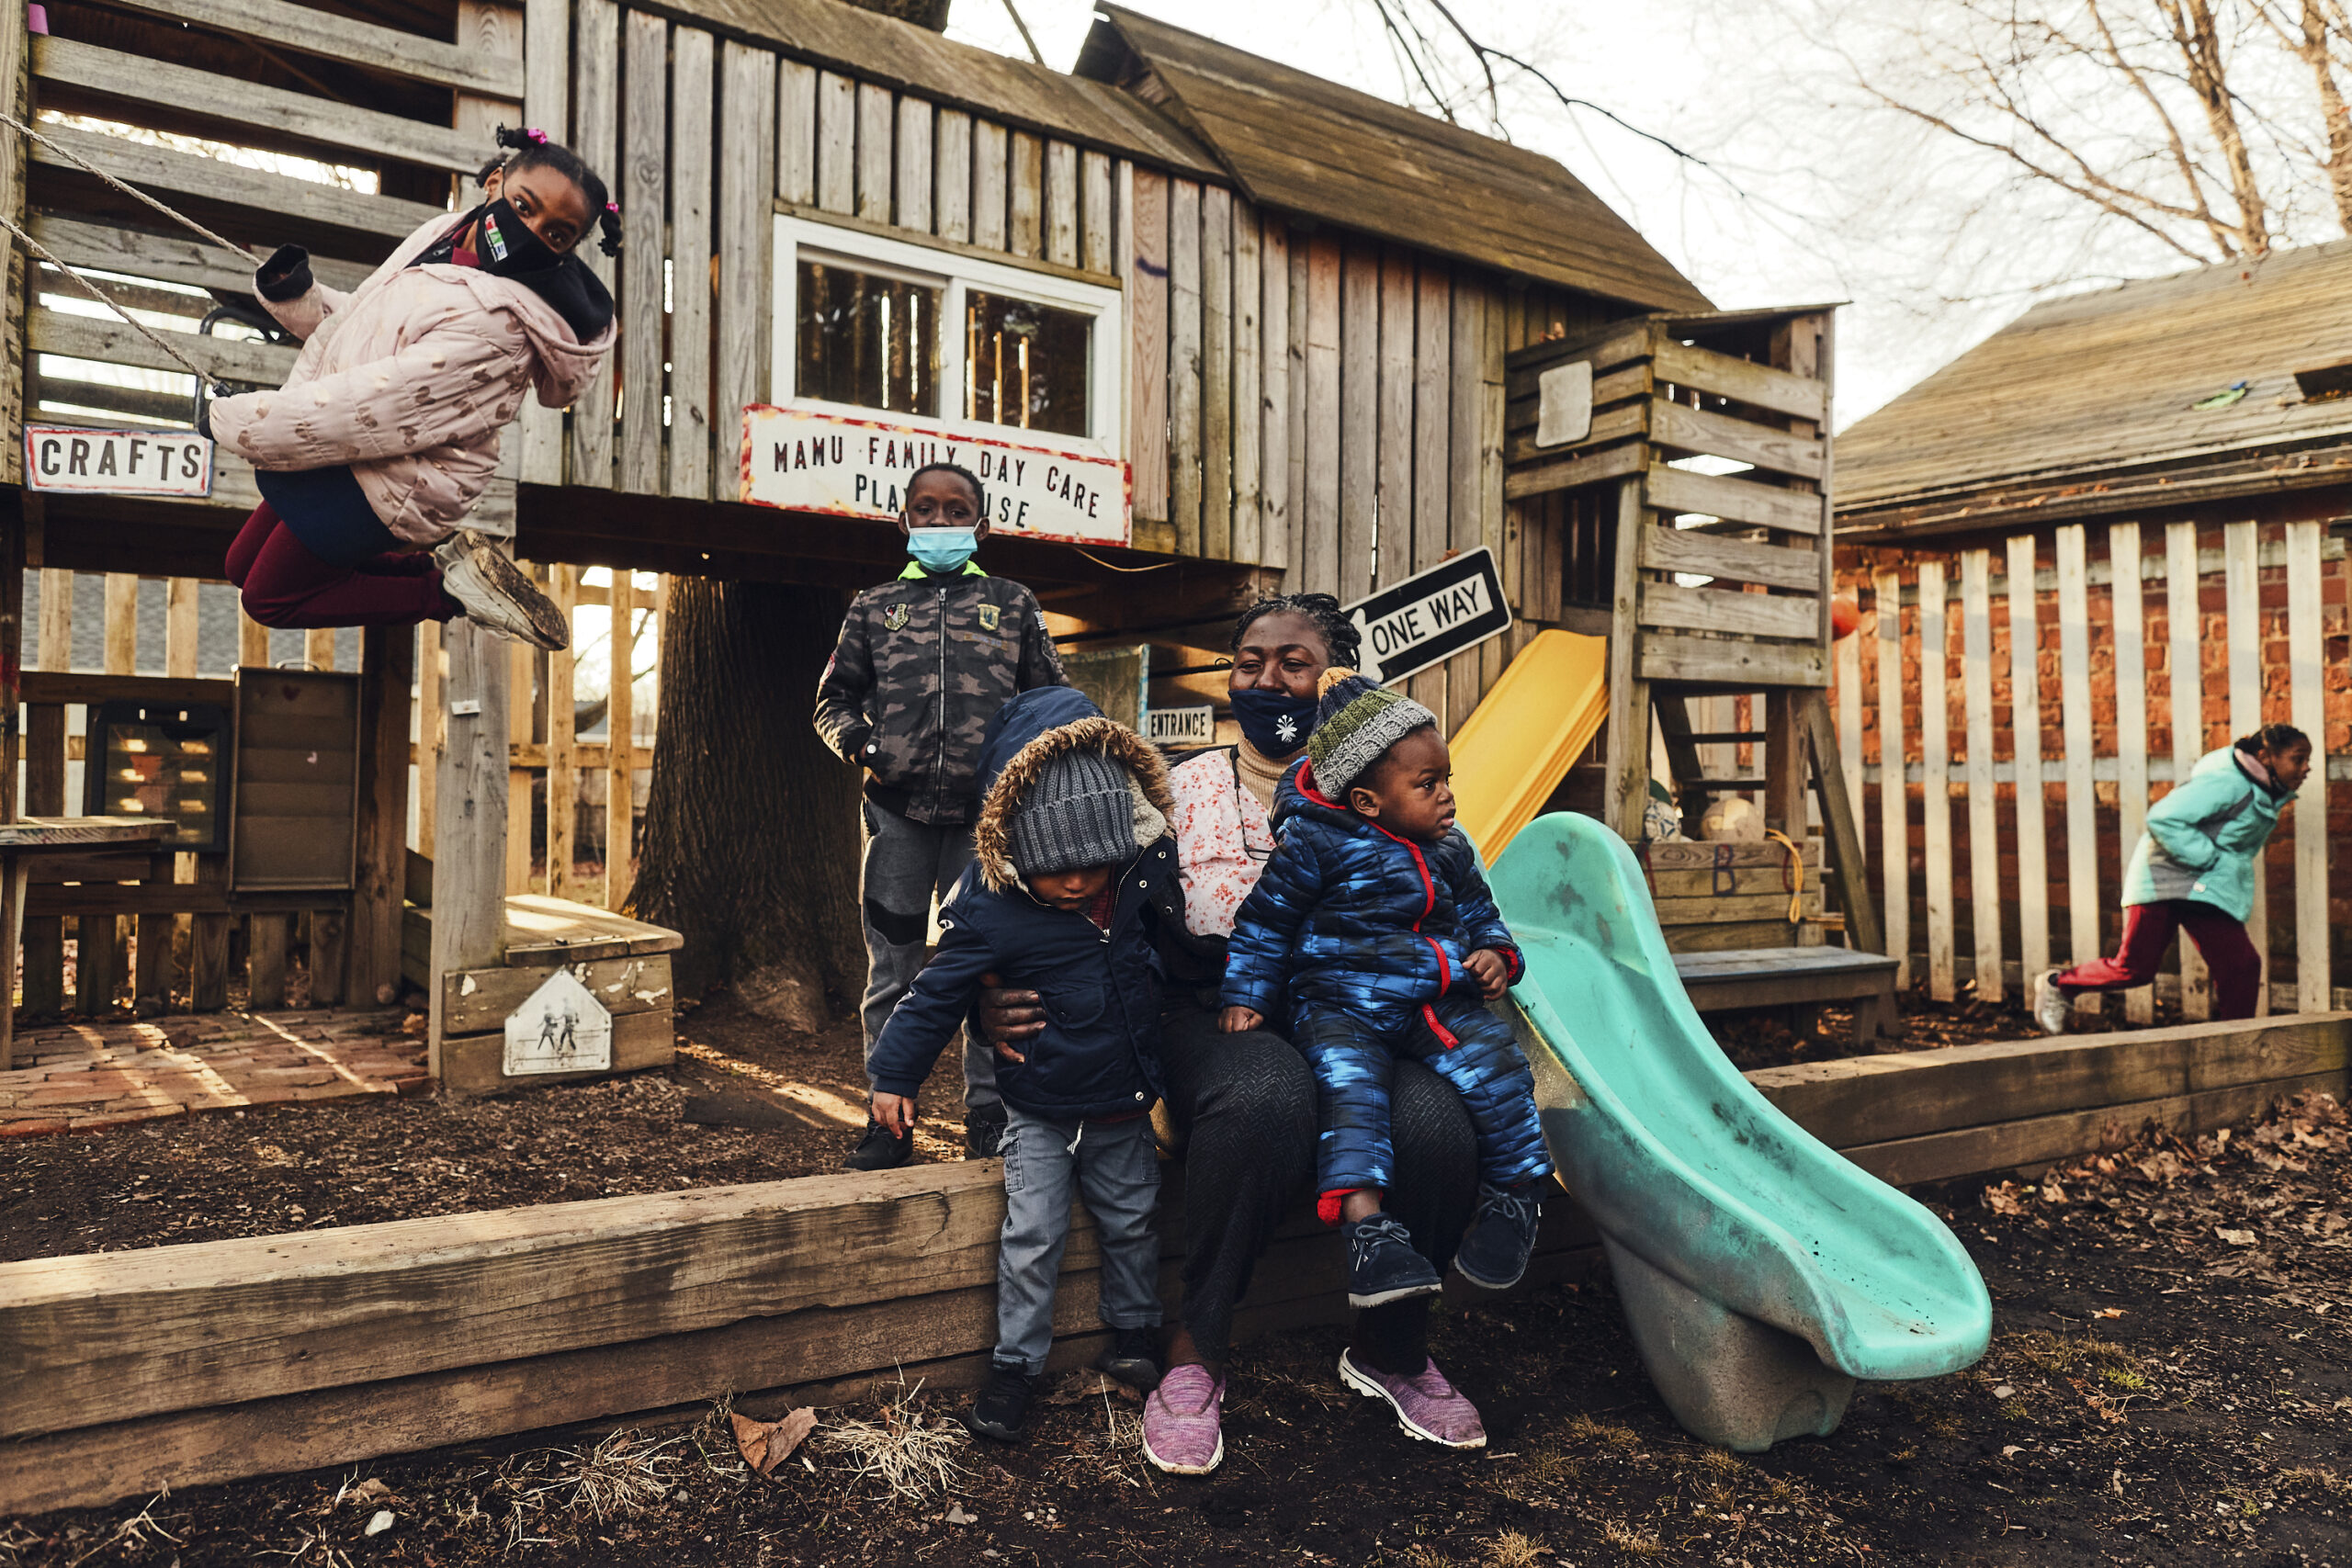 A group of small children in masks play near a playground